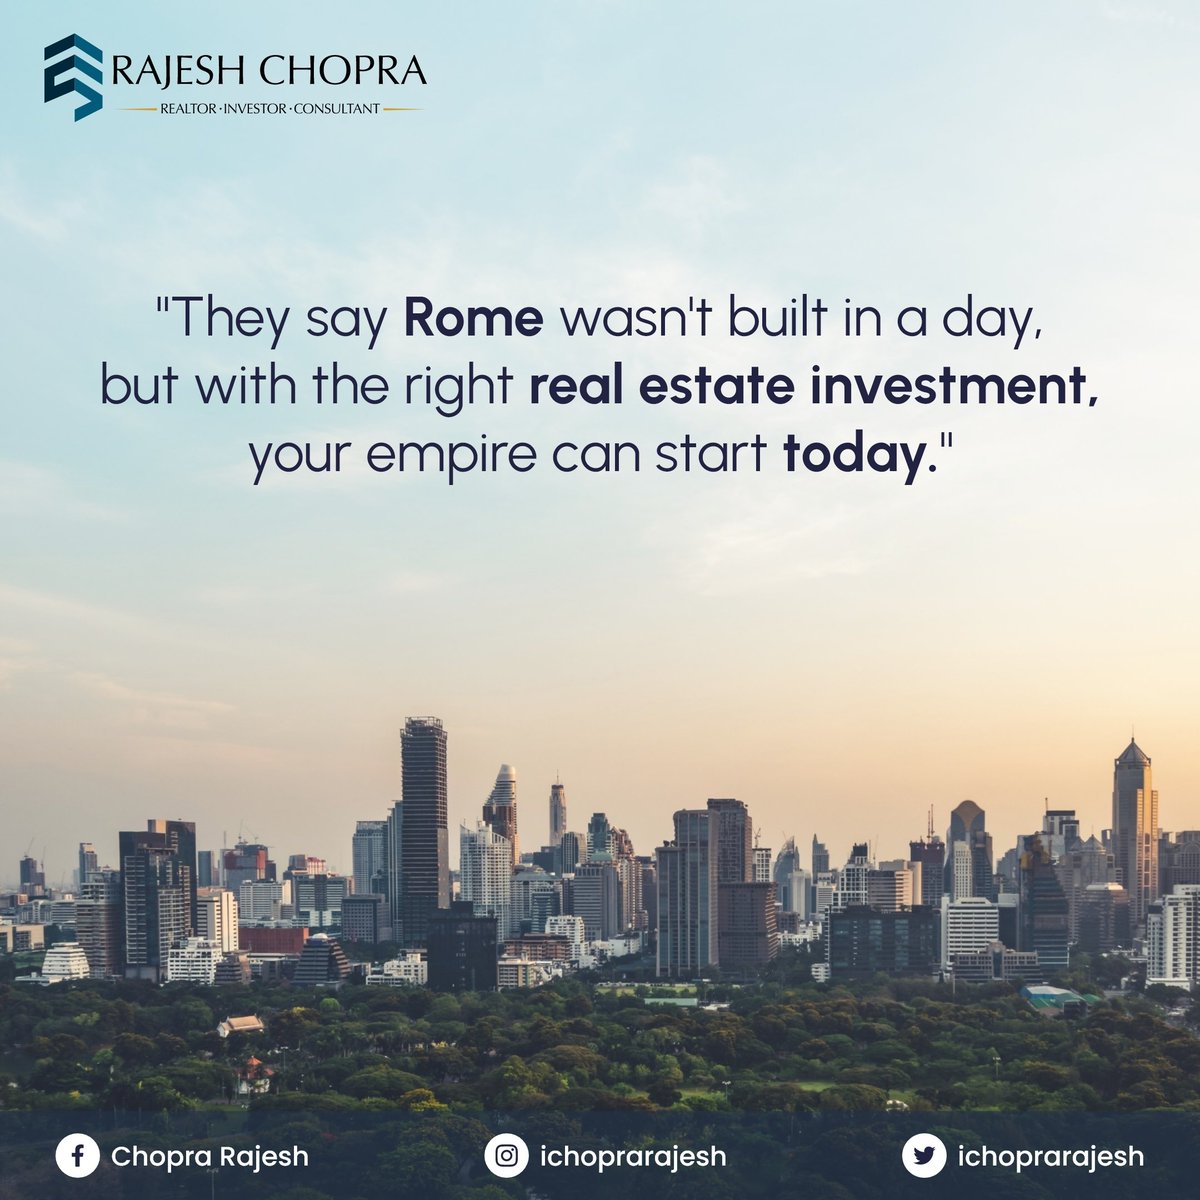 Unlock the power of real estate! 🏗️
Start building your empire with expert guidance and support.

#RealEstateEmpire #InvestmentGoals #RealEstateSuccess